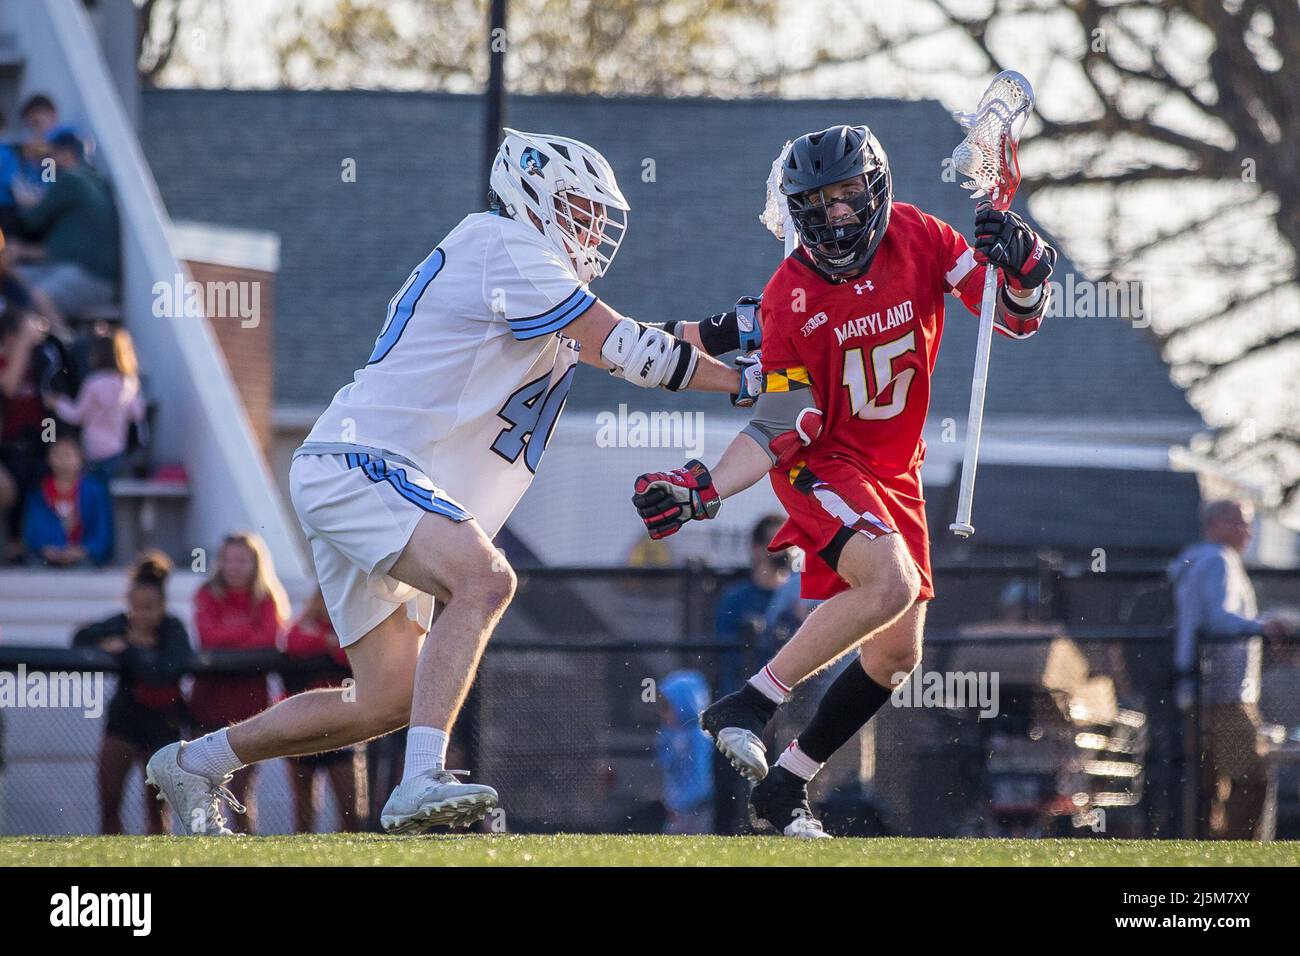 April 23, 2022: Johns Hopkins midfielder Garrett Degnon (40) lays the stick into Maryland attack Anthony DeMaio's (16) ribs behind the net during the ncaa men's lacrosse regular season finale between the Maryland Terrapins and the Johns Hopkins Blue Jays at Homewood Field in Baltimore, Maryland Photographer: Cory Royster Stock Photo